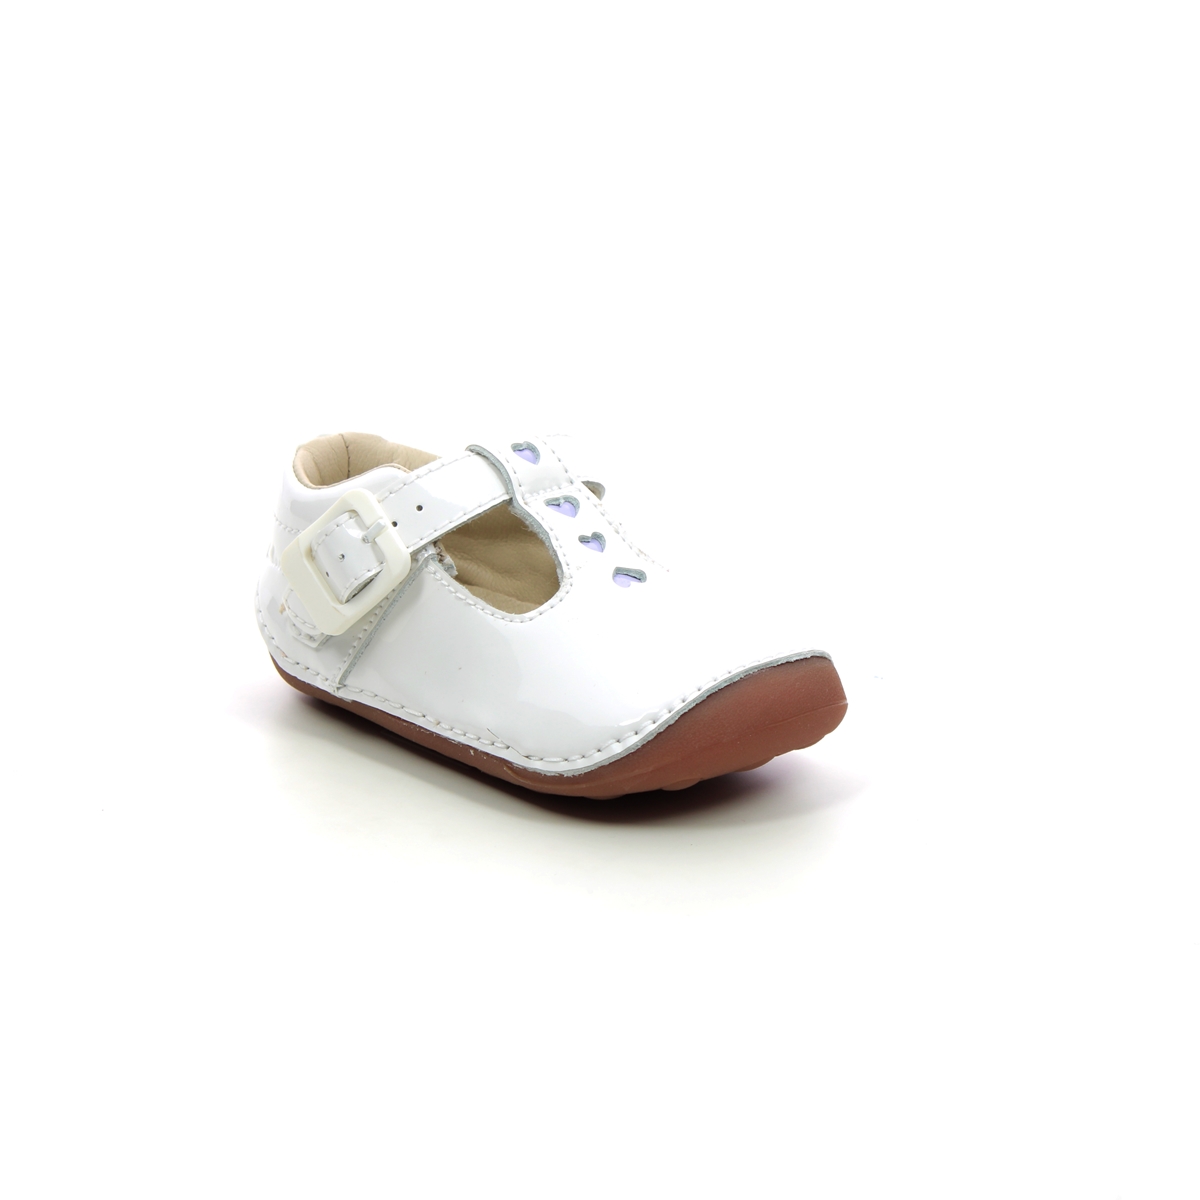 Clarks Tiny Beat T White patent Kids girls first and baby shoes 7158-76F in a Plain Leather in Size 5